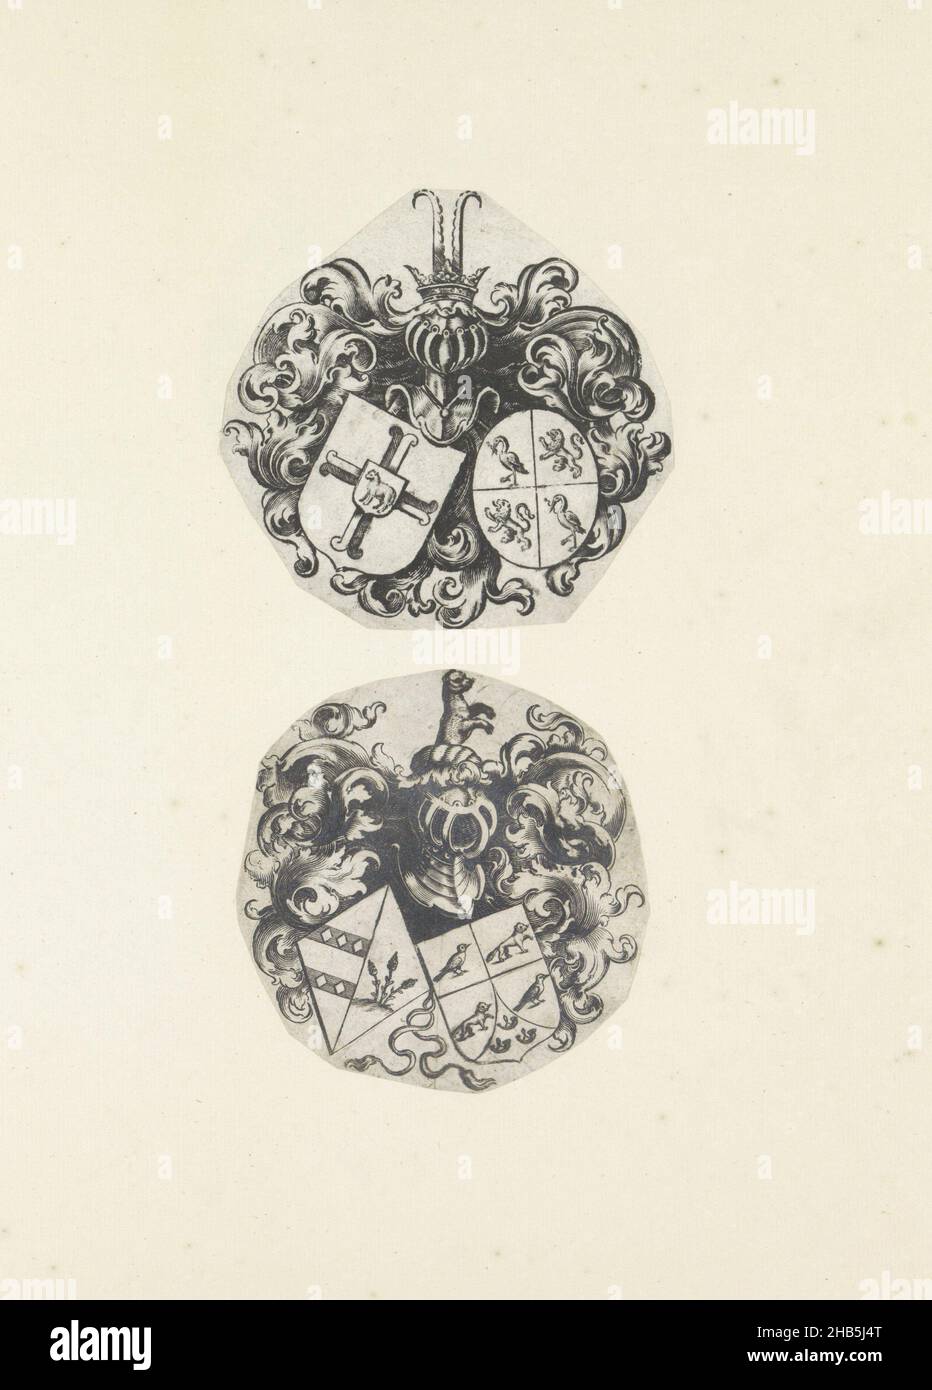 Two arms, Two representations on an album page. They are two showy helmets with two unidentified arms. On the shields climbing lions, storks, birds, foxes and horns. The prints are part of an album., print maker: anonymous, 1550 - 1650, paper, engraving, height 383 mm × width 310 mm Stock Photo